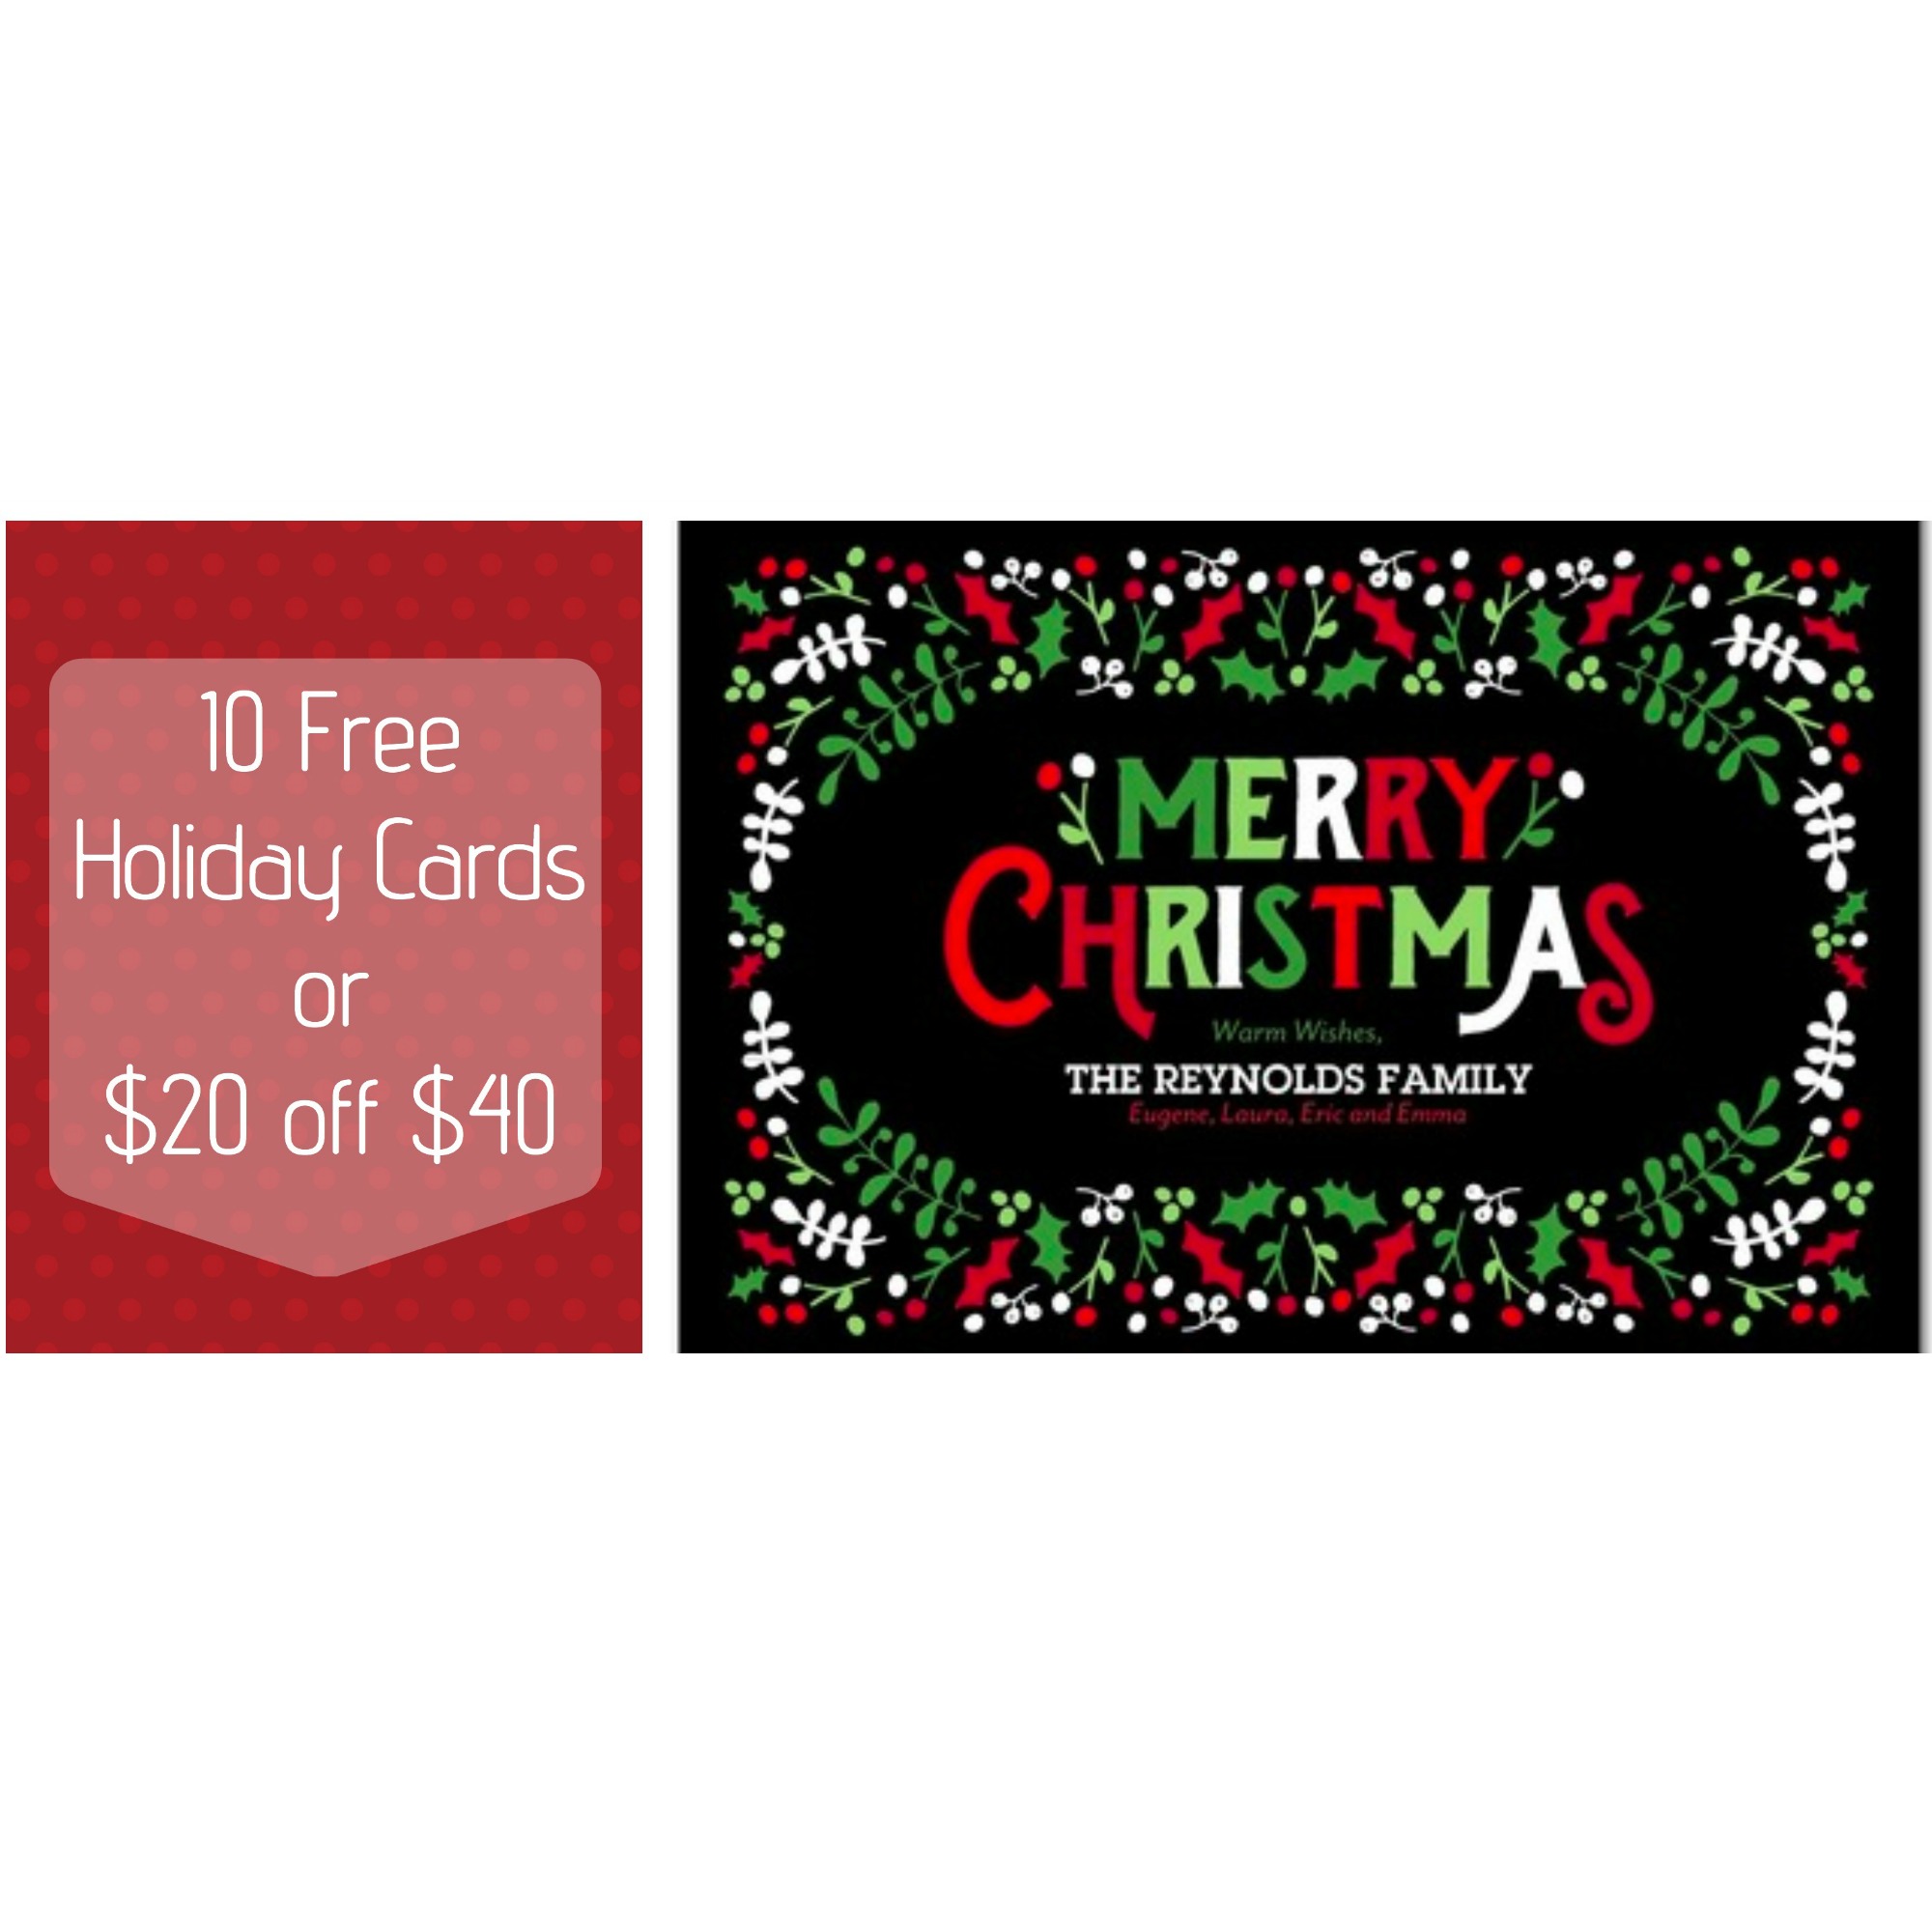 Free Holiday Cards and $20 off!